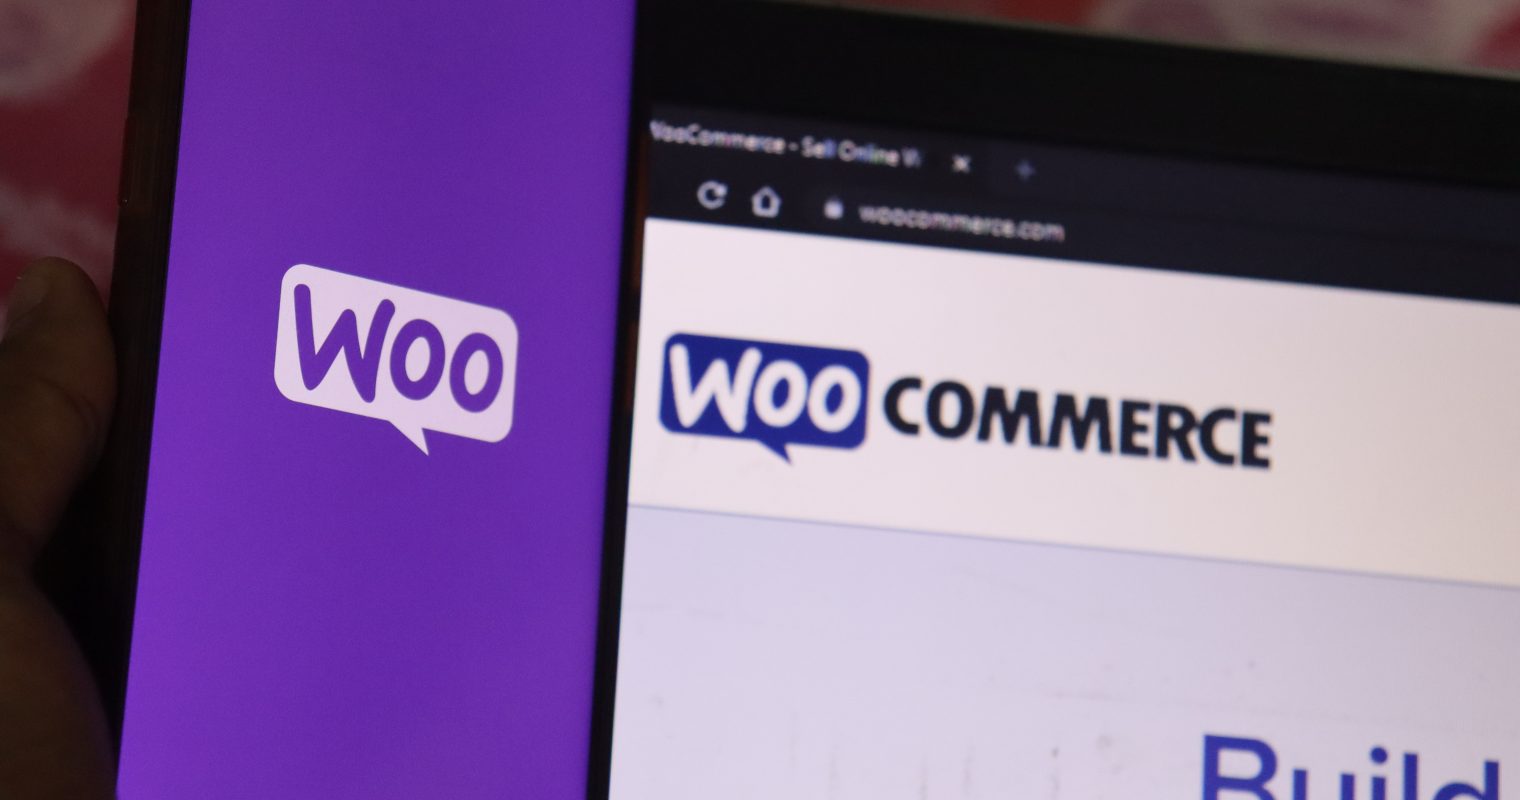 WooCommerce: what distinguishes it vs other eCommerce platforms?